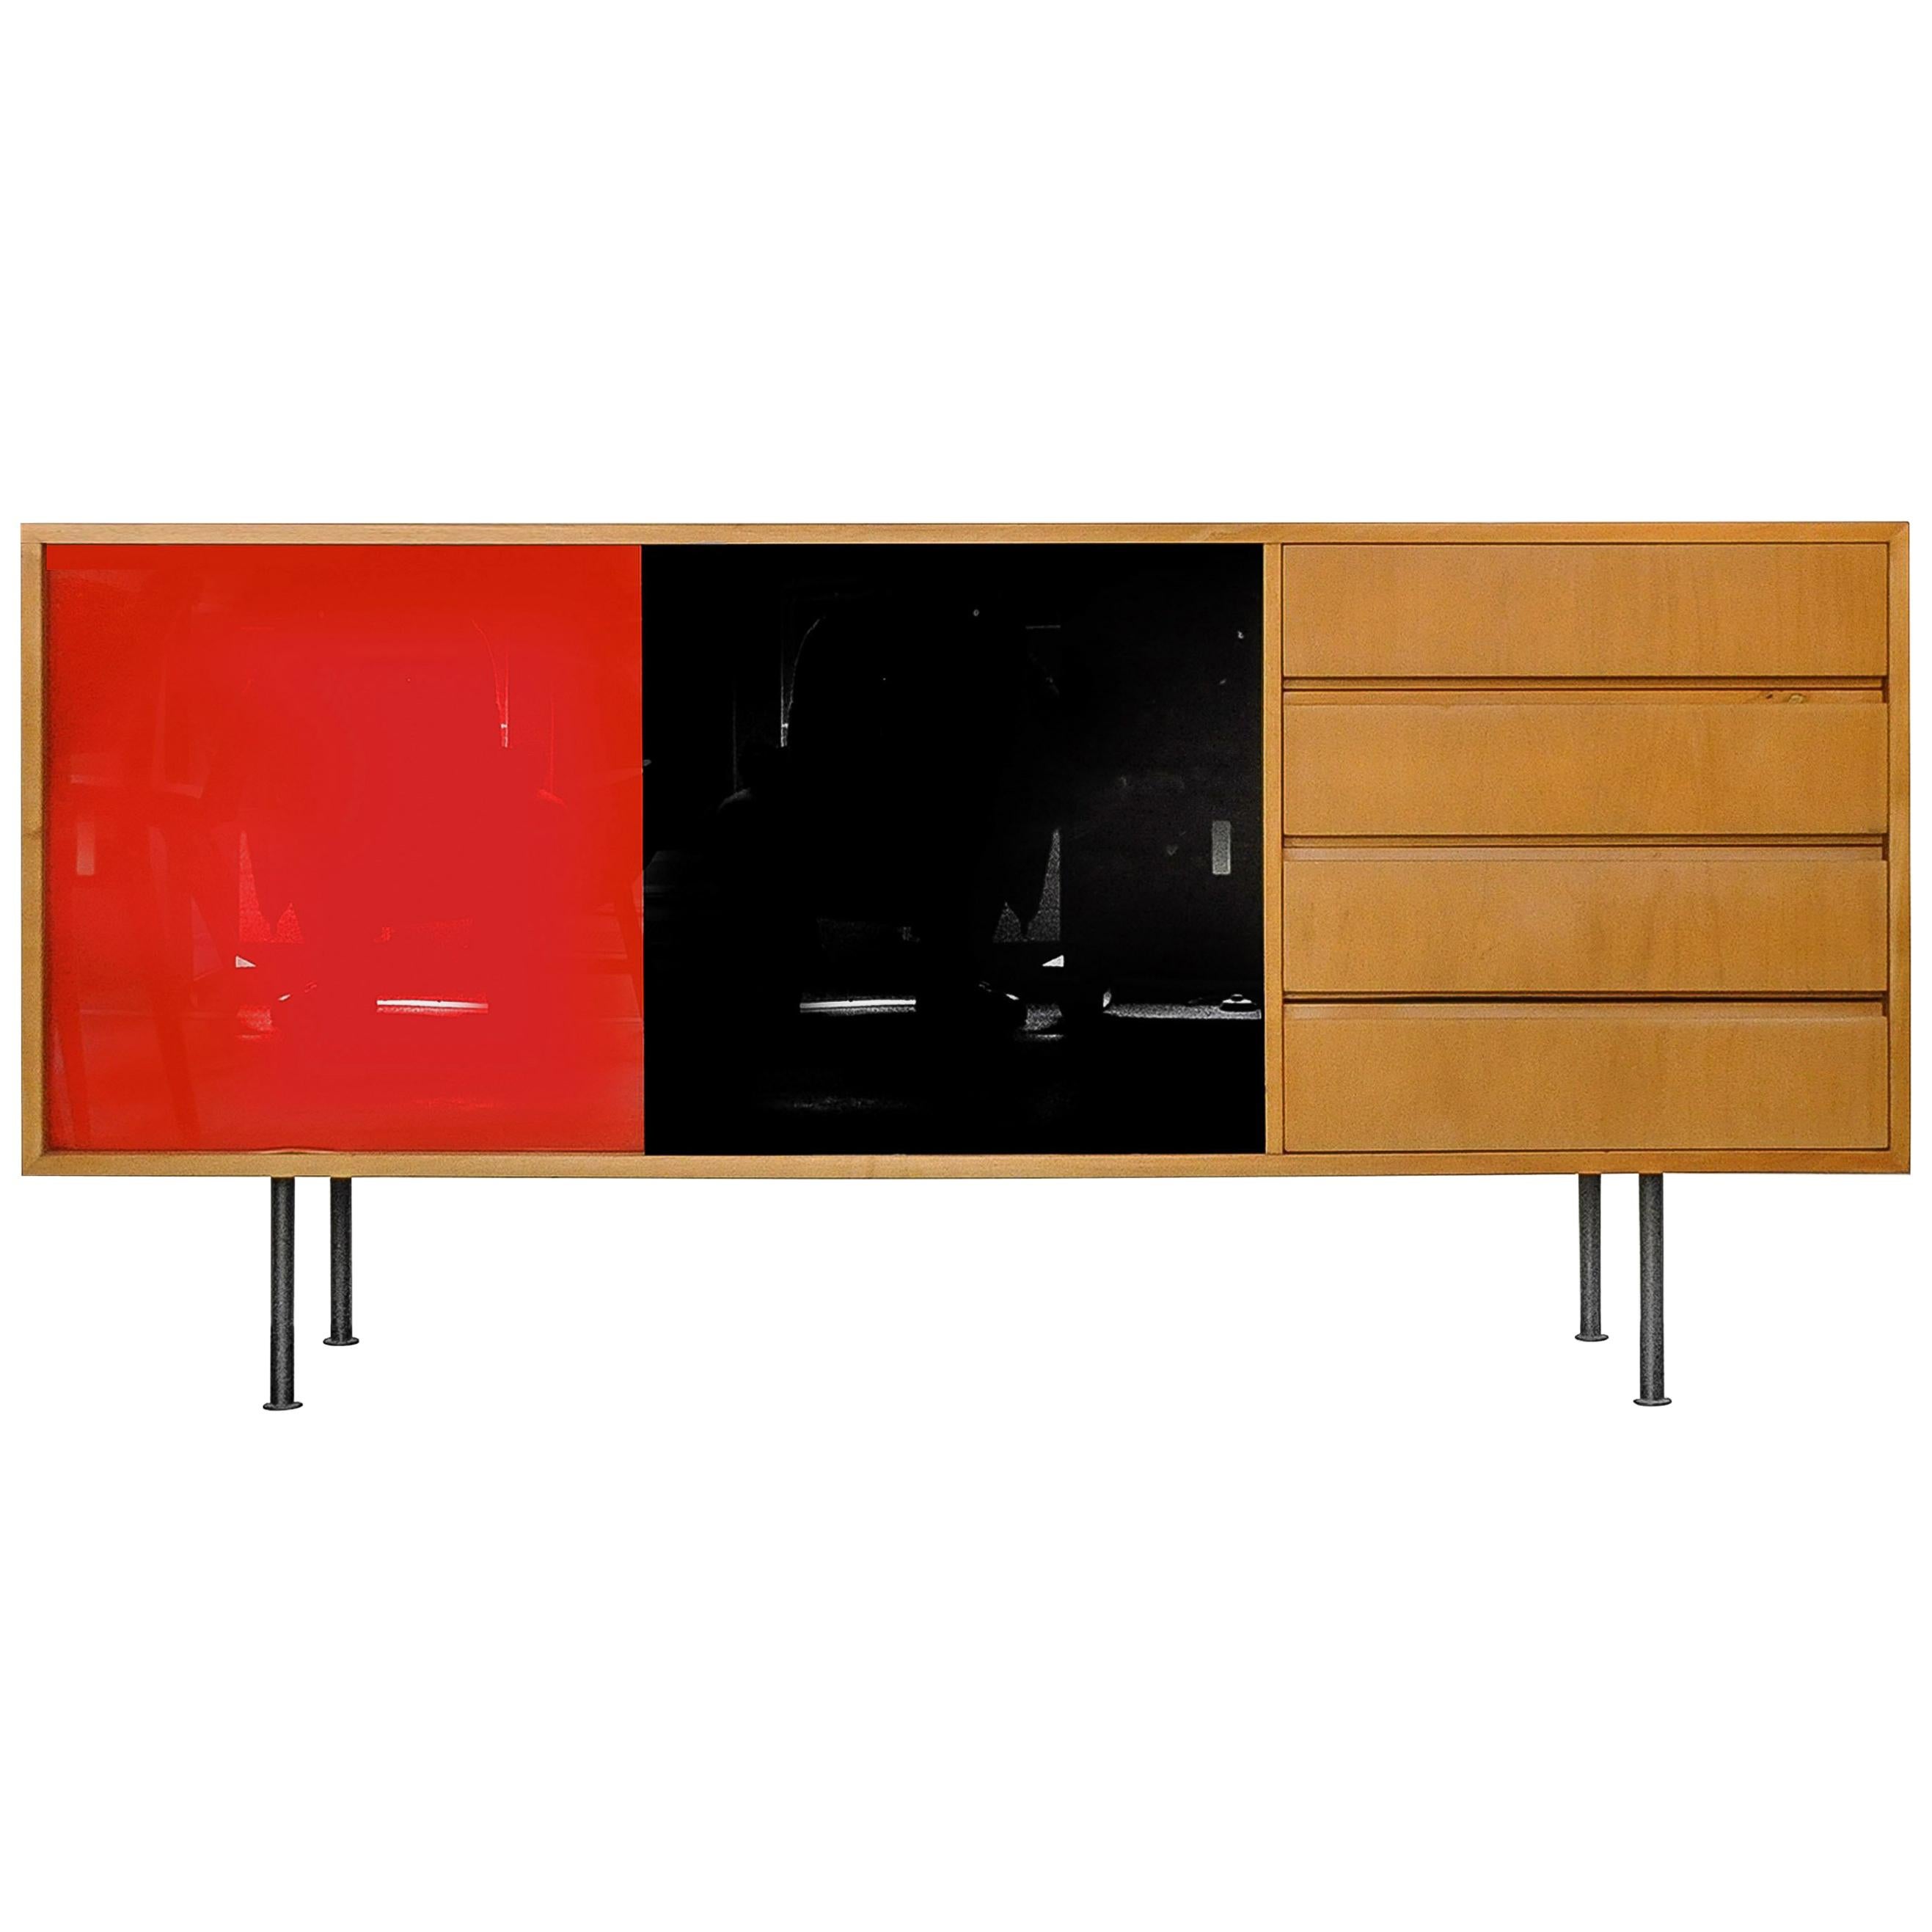 Swiss Modernist Sideboard with Red and Black Glass Sliding Doors, 1960s For Sale